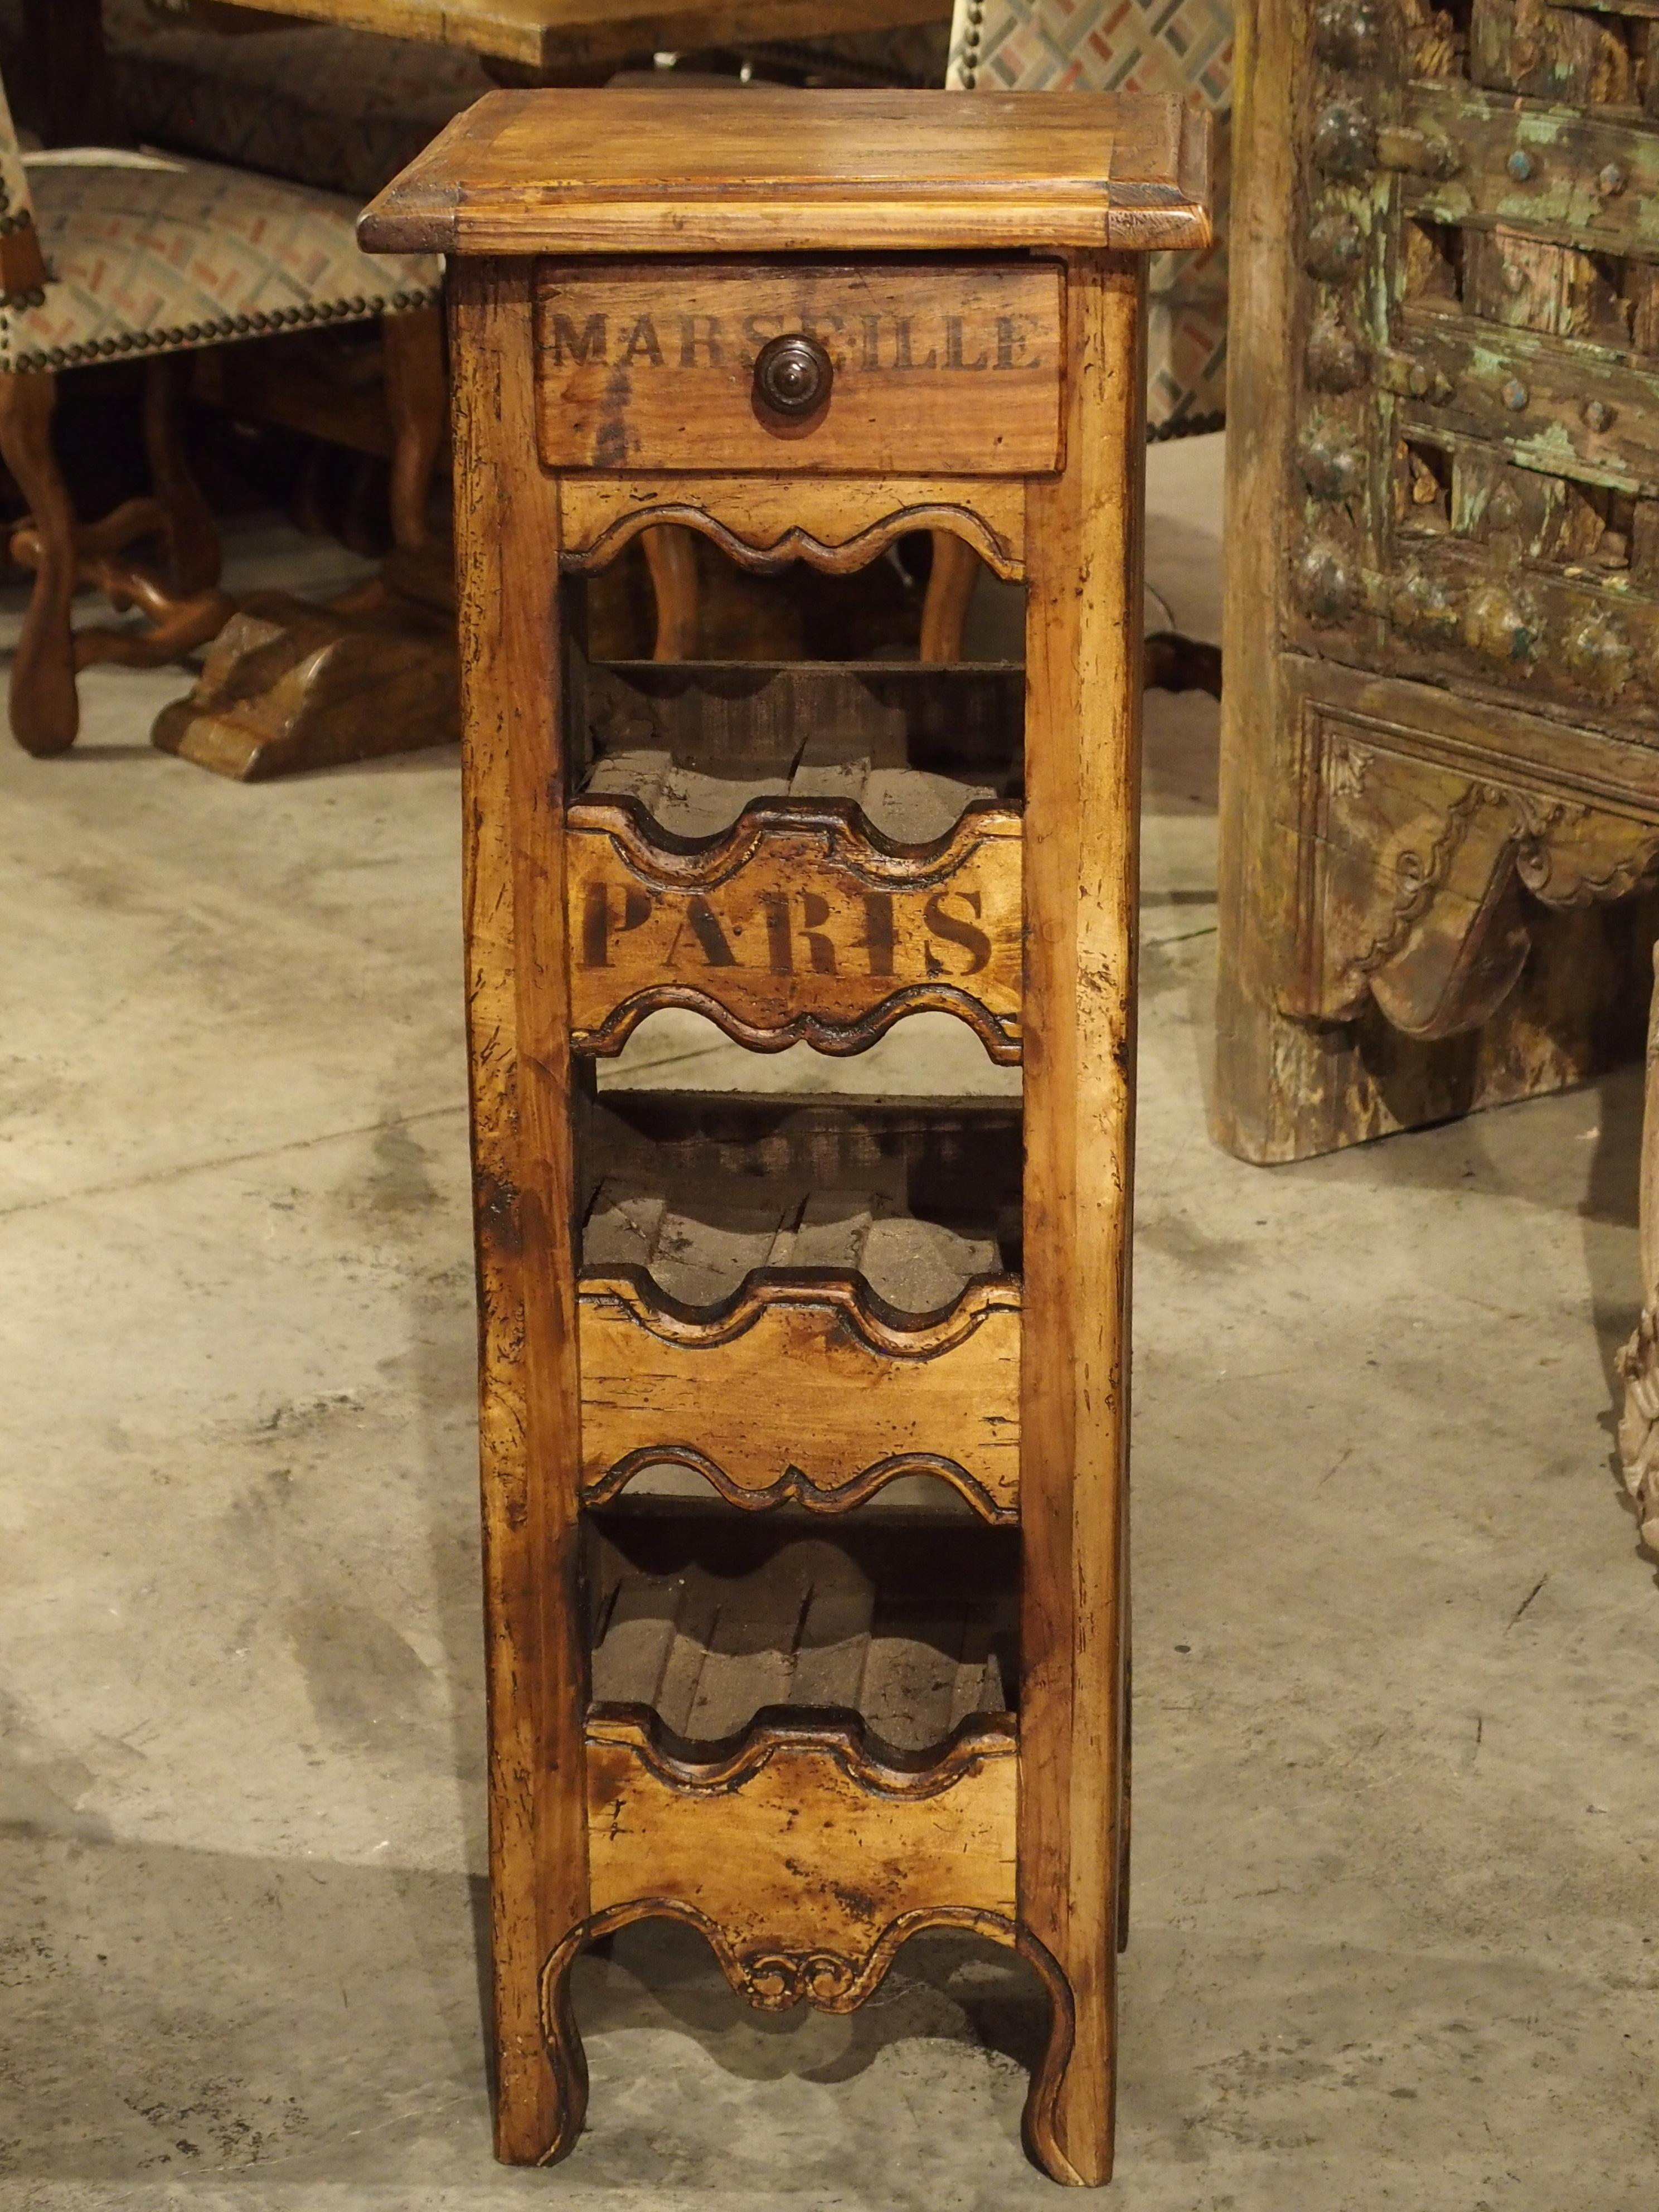 This charming wine holder has been made from salvaged antique boards in France. There is a drawer at the top with Marseille in block letters on its front and Paris in block letters on the top wine rack piece. Perfect for the wine room, den, kitchen